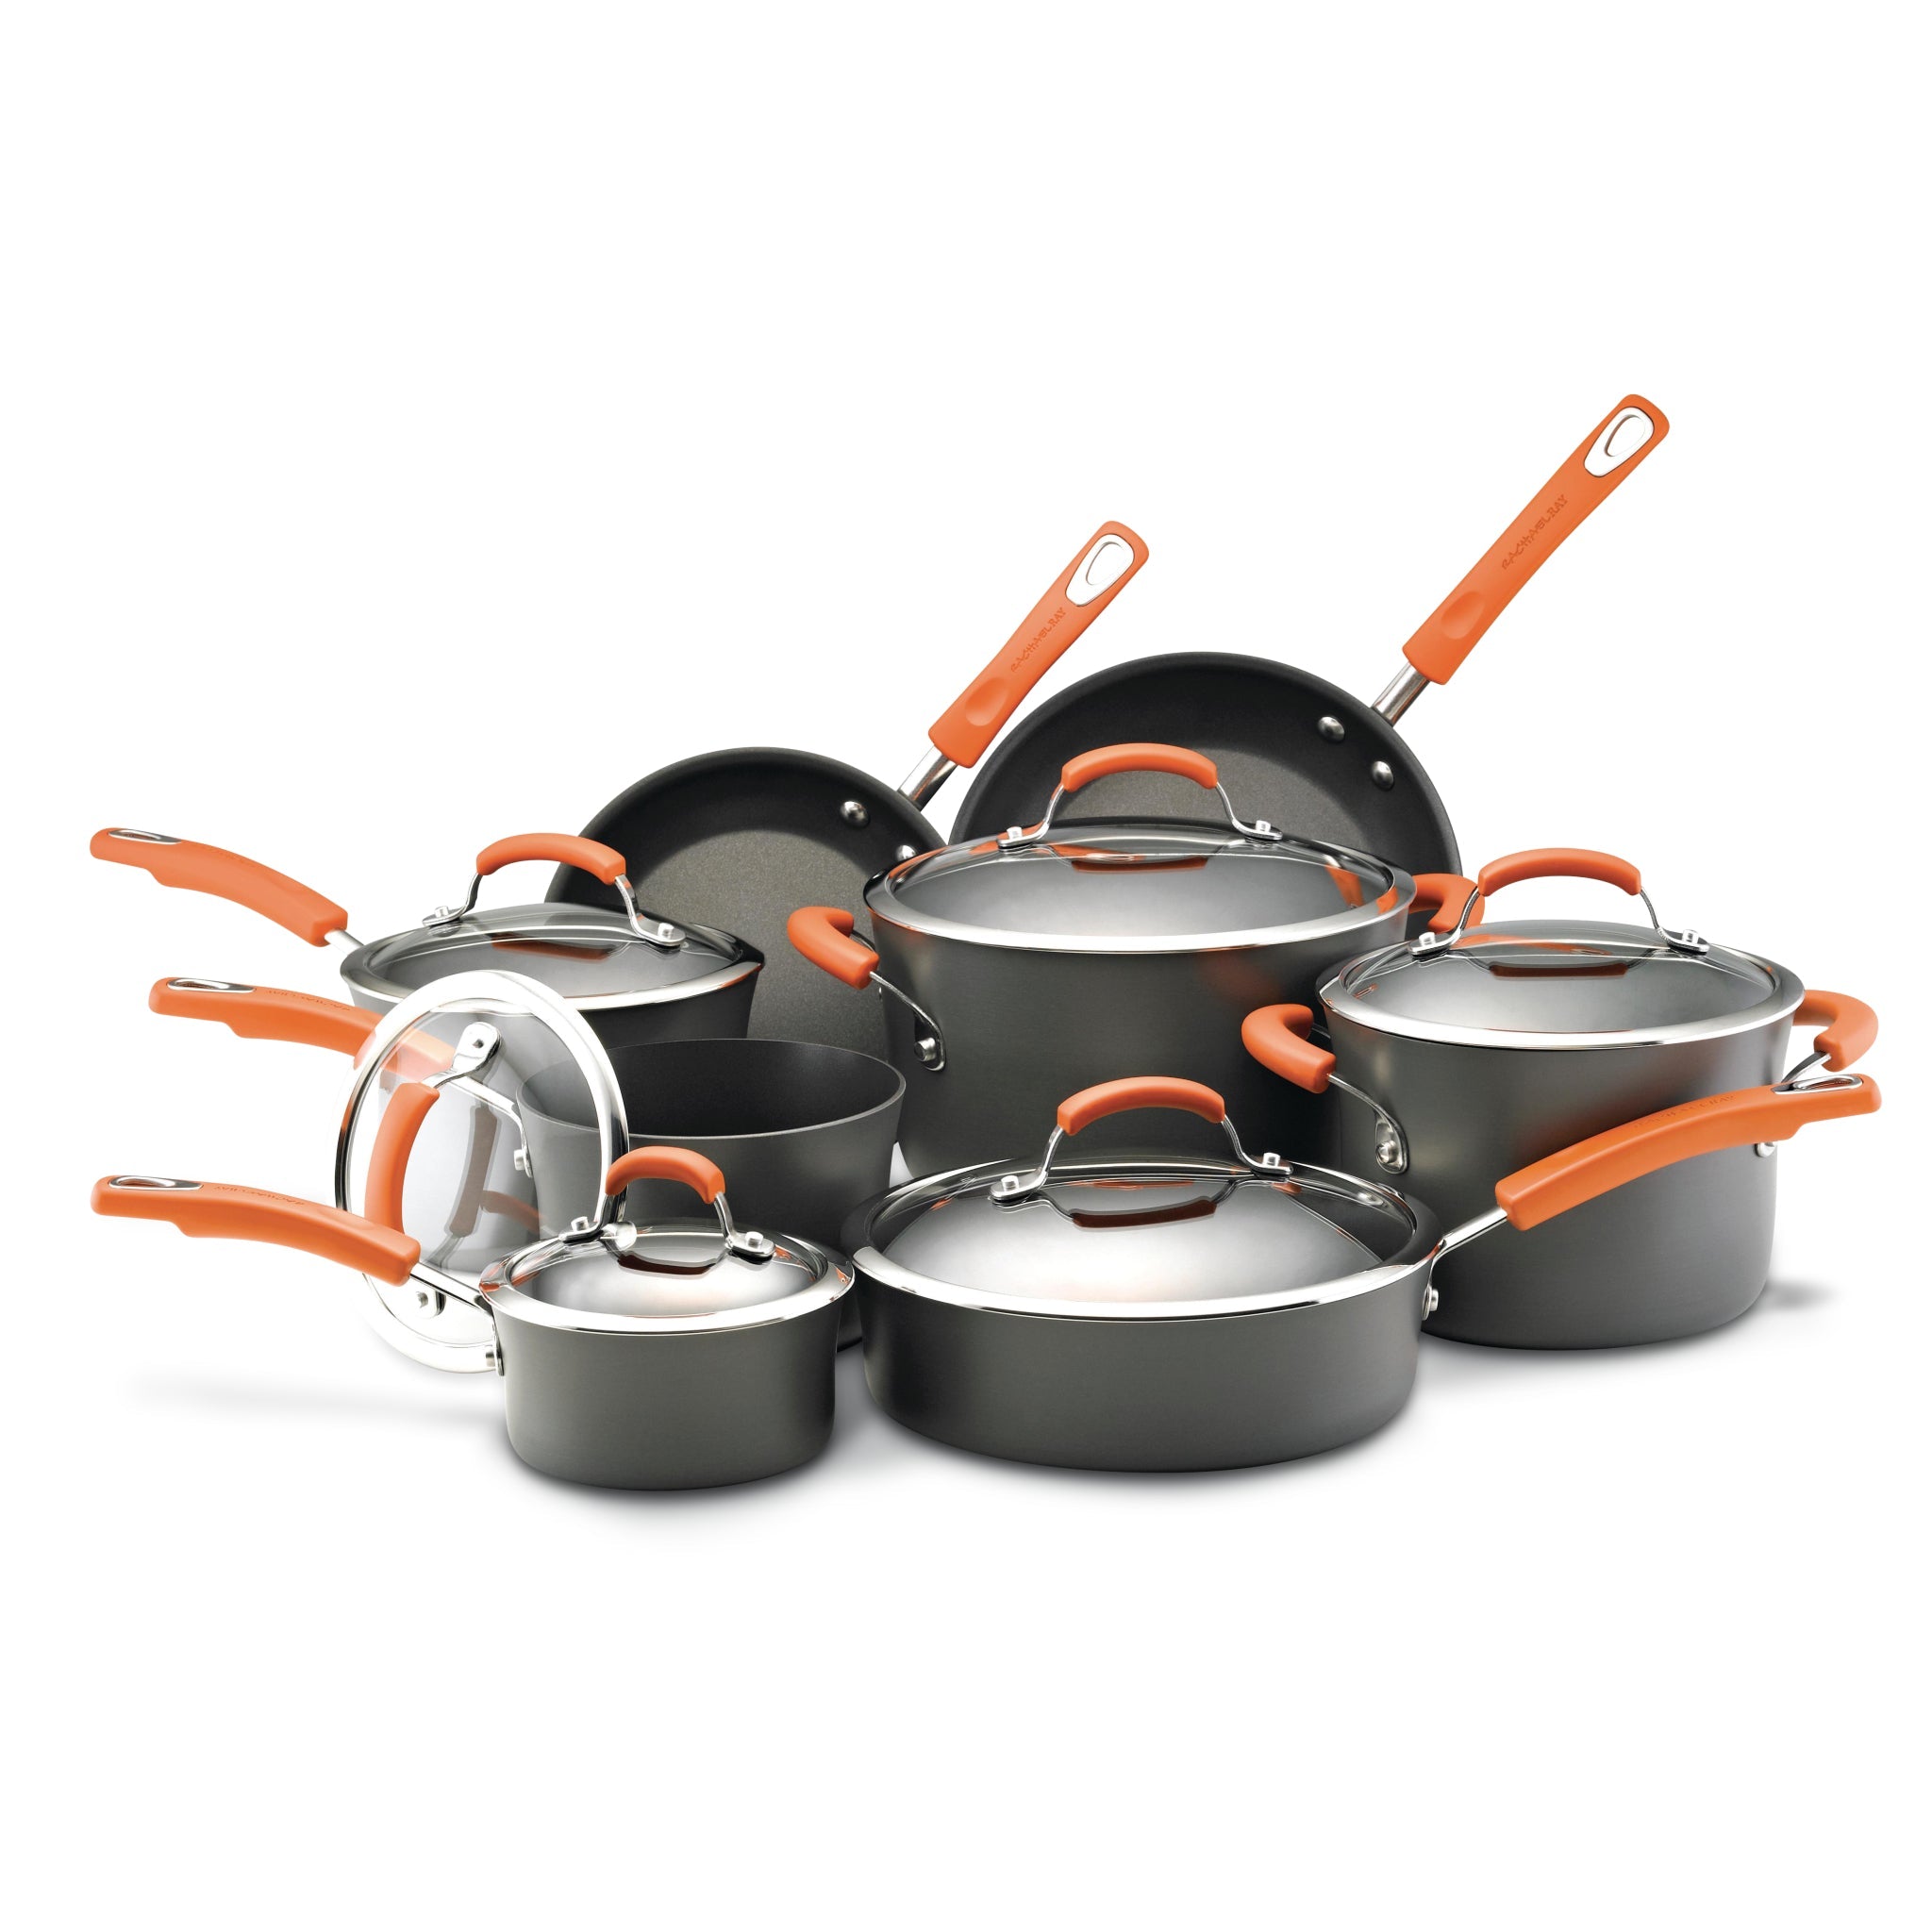 Classic Brights 14-Piece Hard Anodized Cookware Set